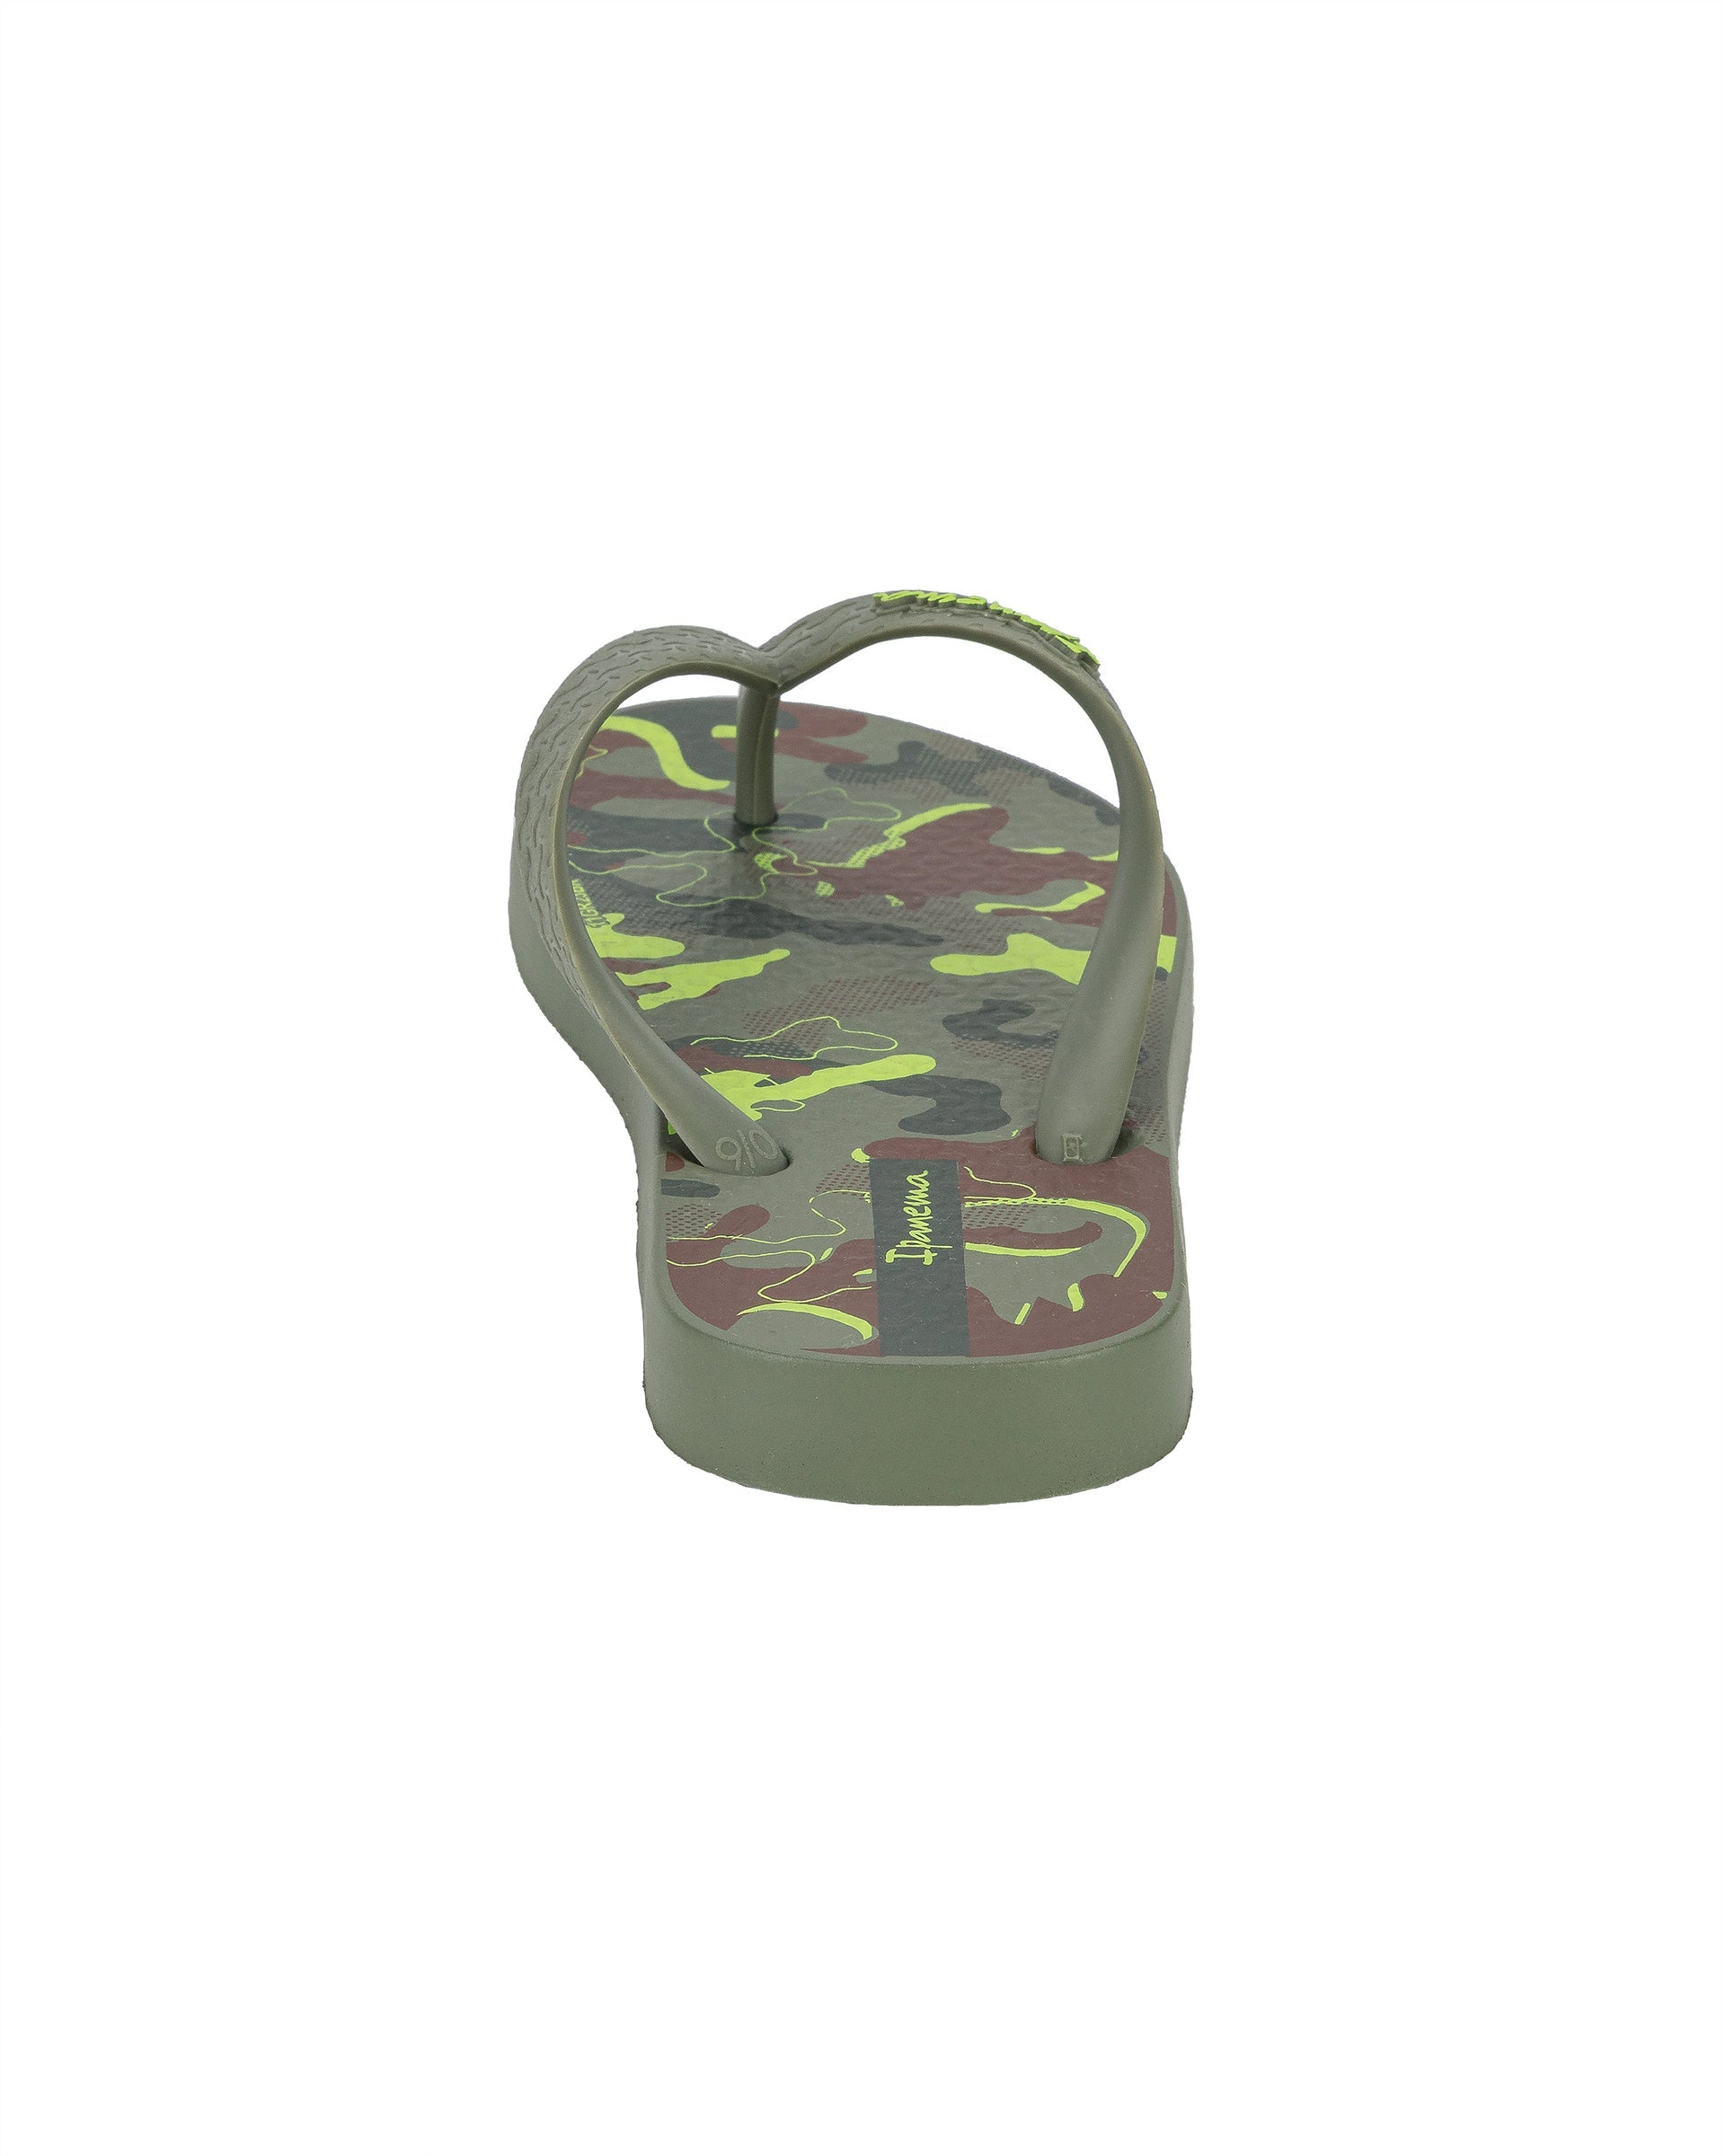 Back view of a green Ipanema Temas kids flip flop with camo print.